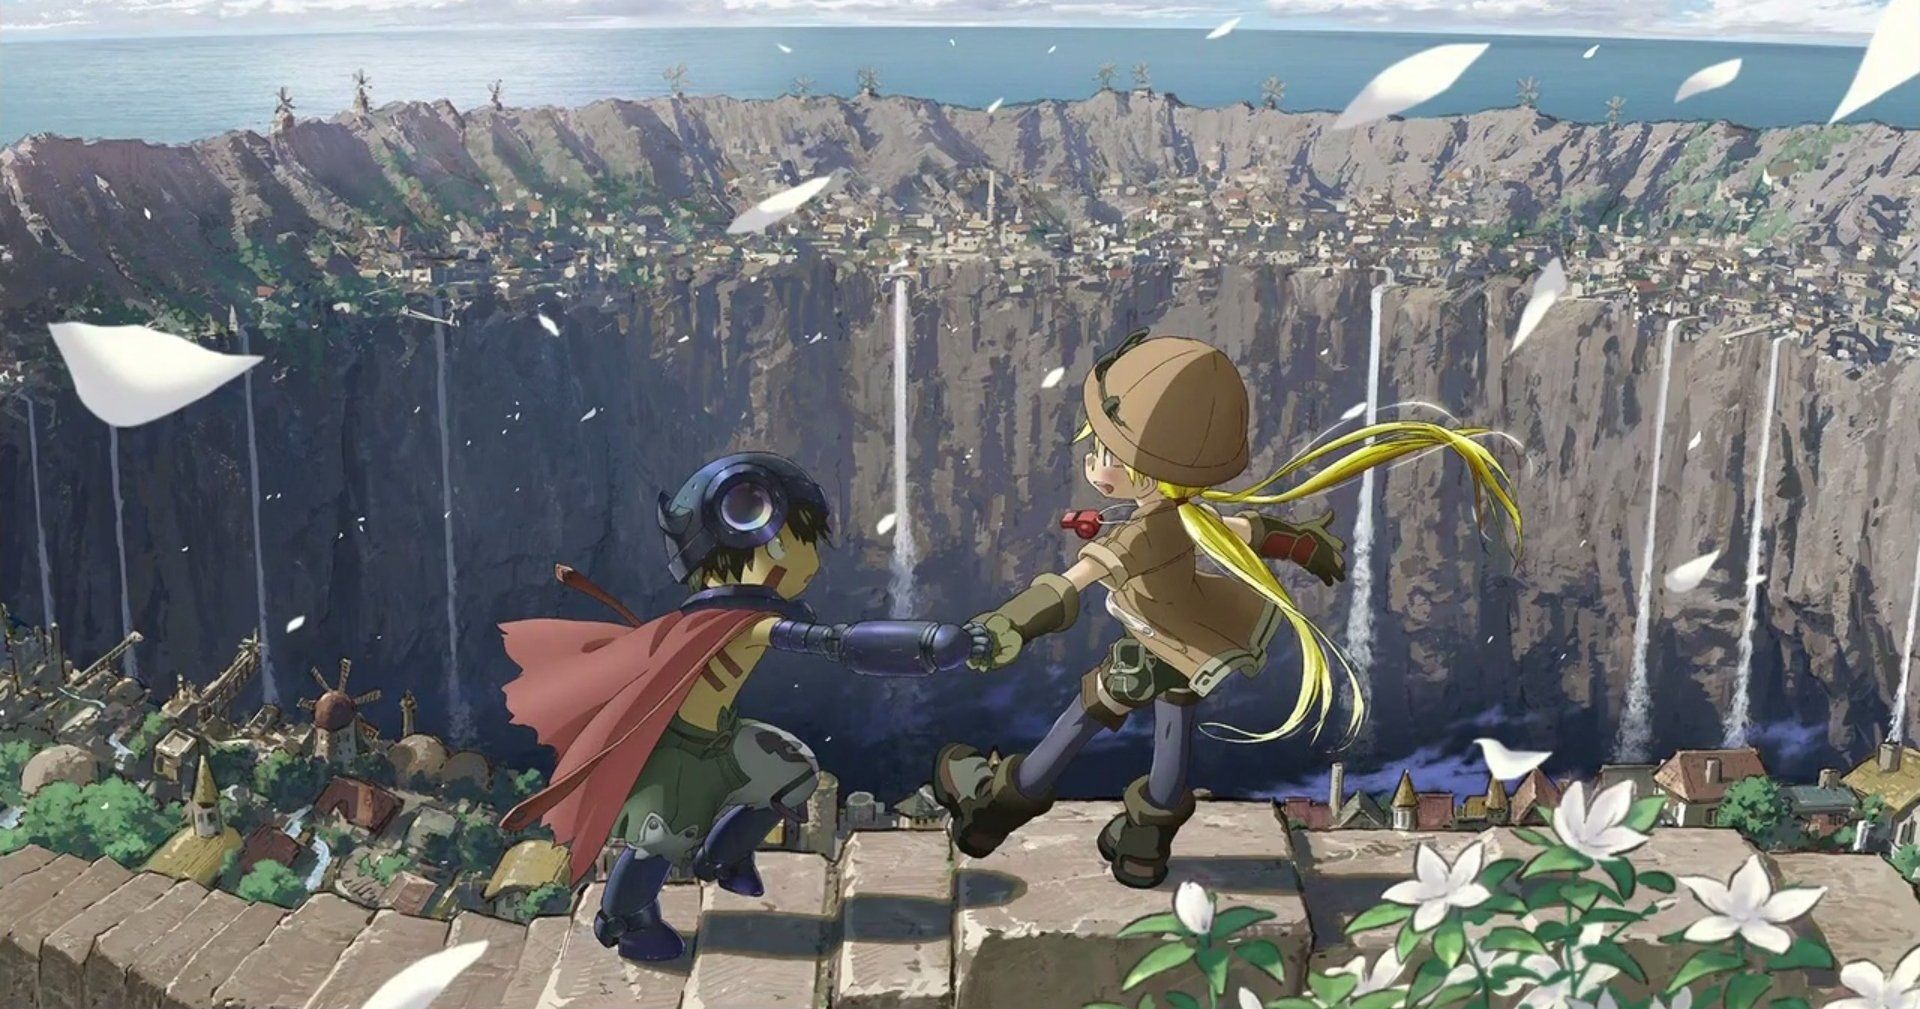 Made in Abyss season 2 episode 3 release date and time